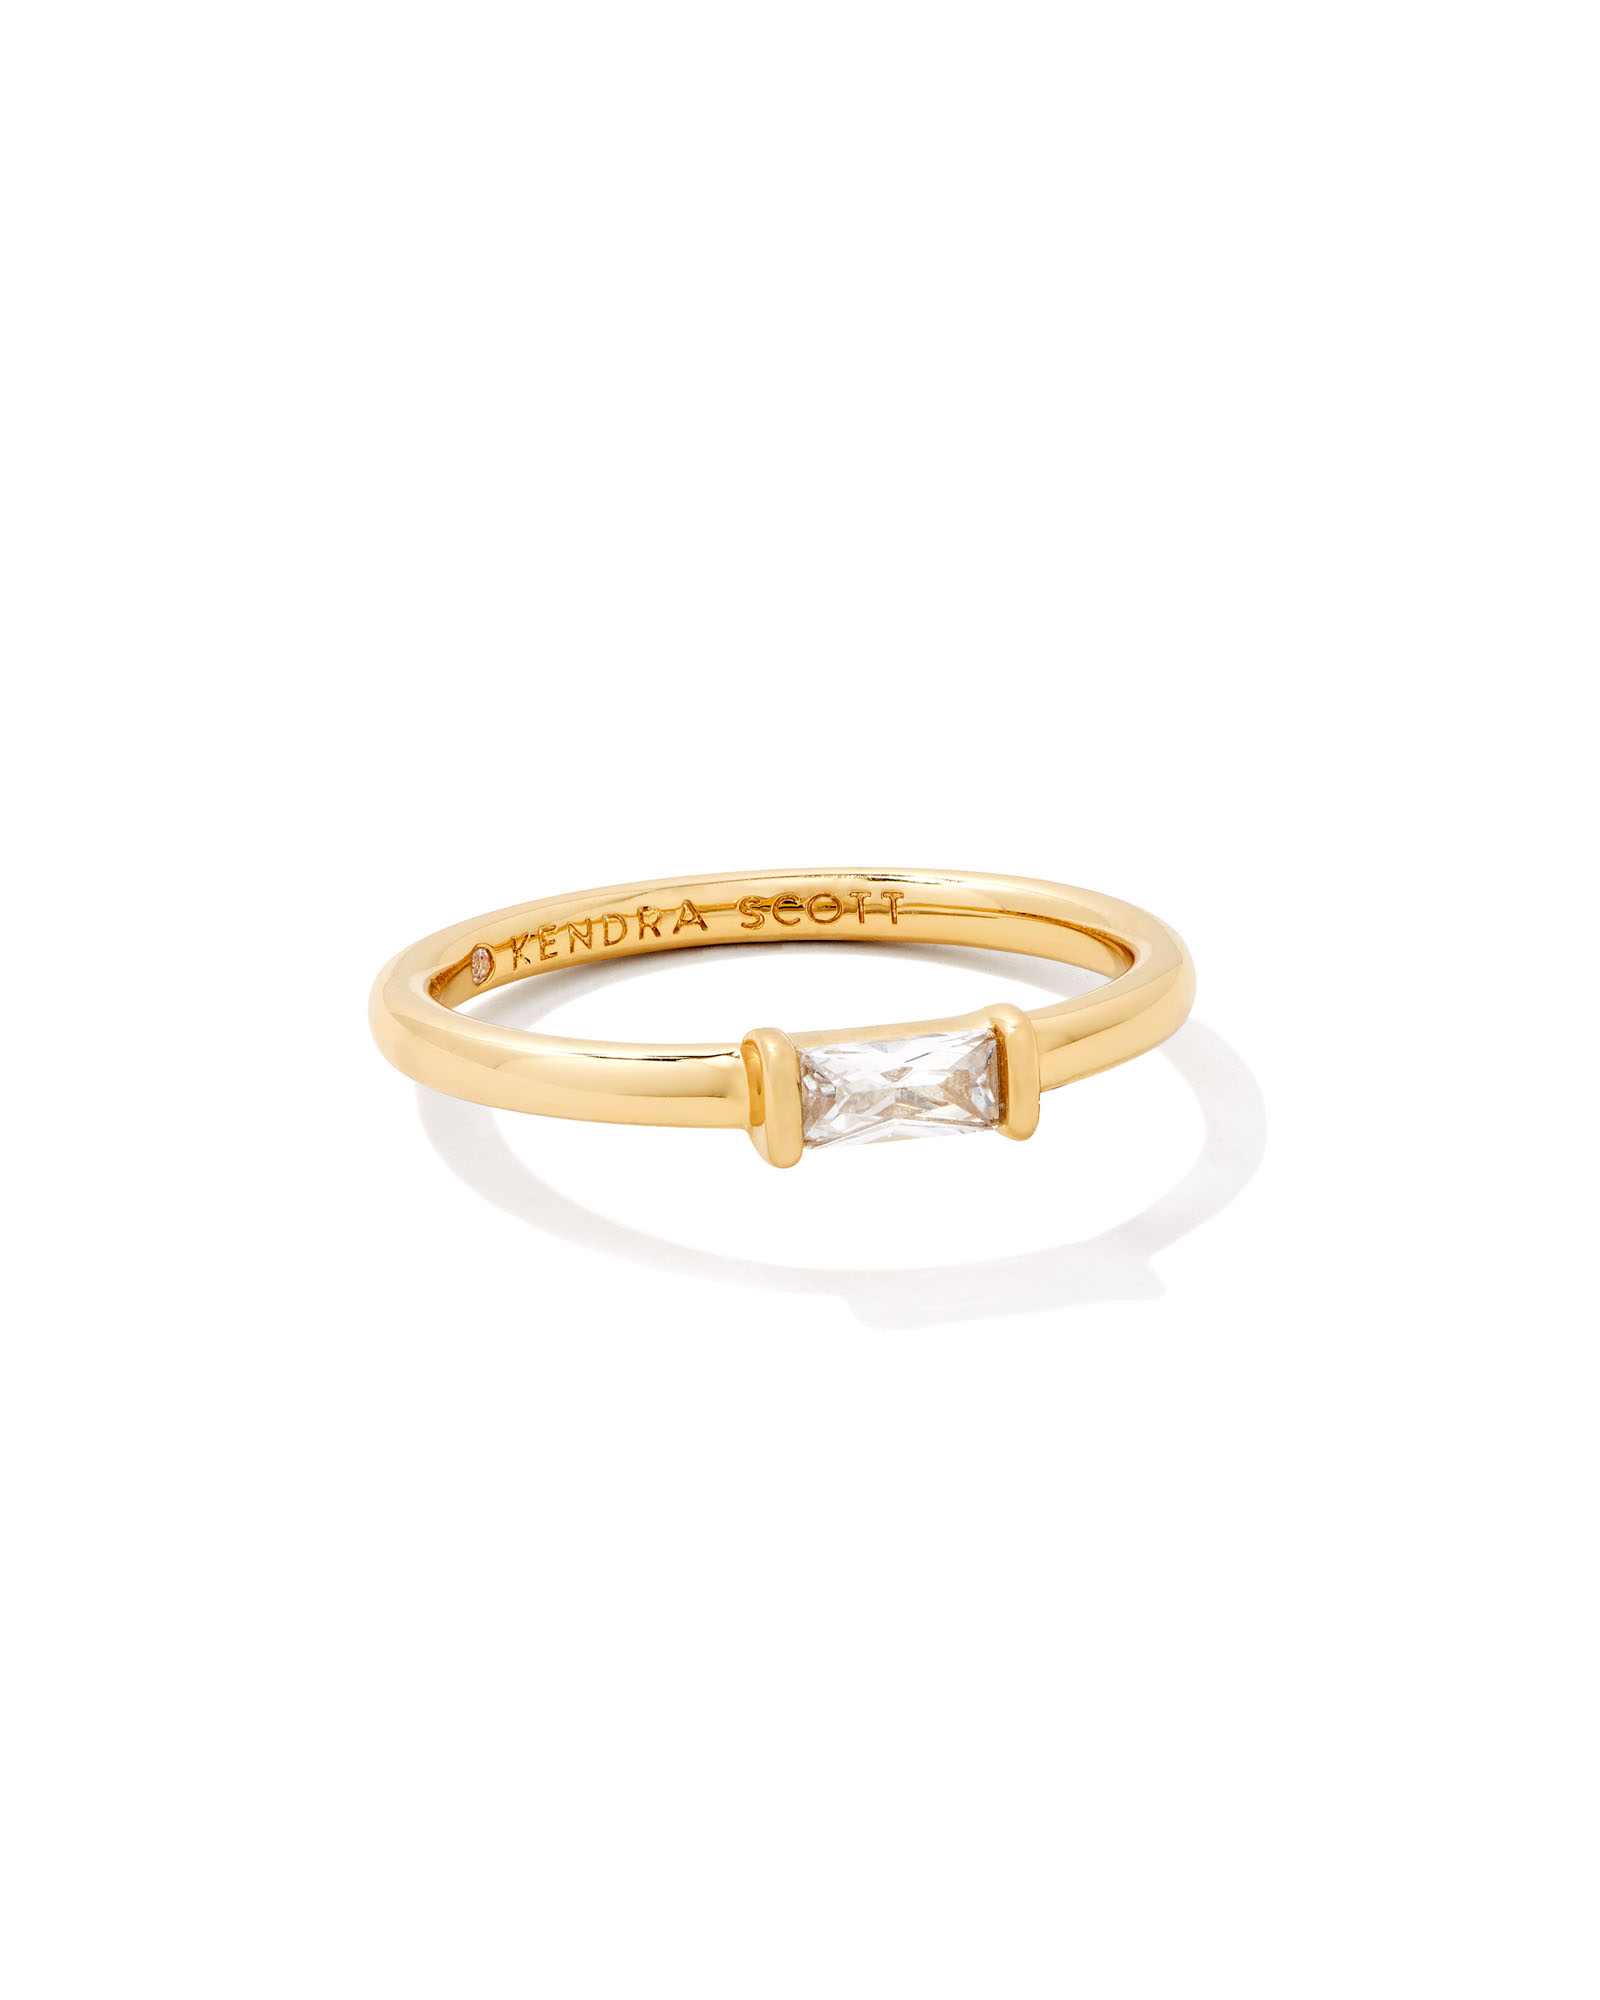 Andi Band Ring in Gold